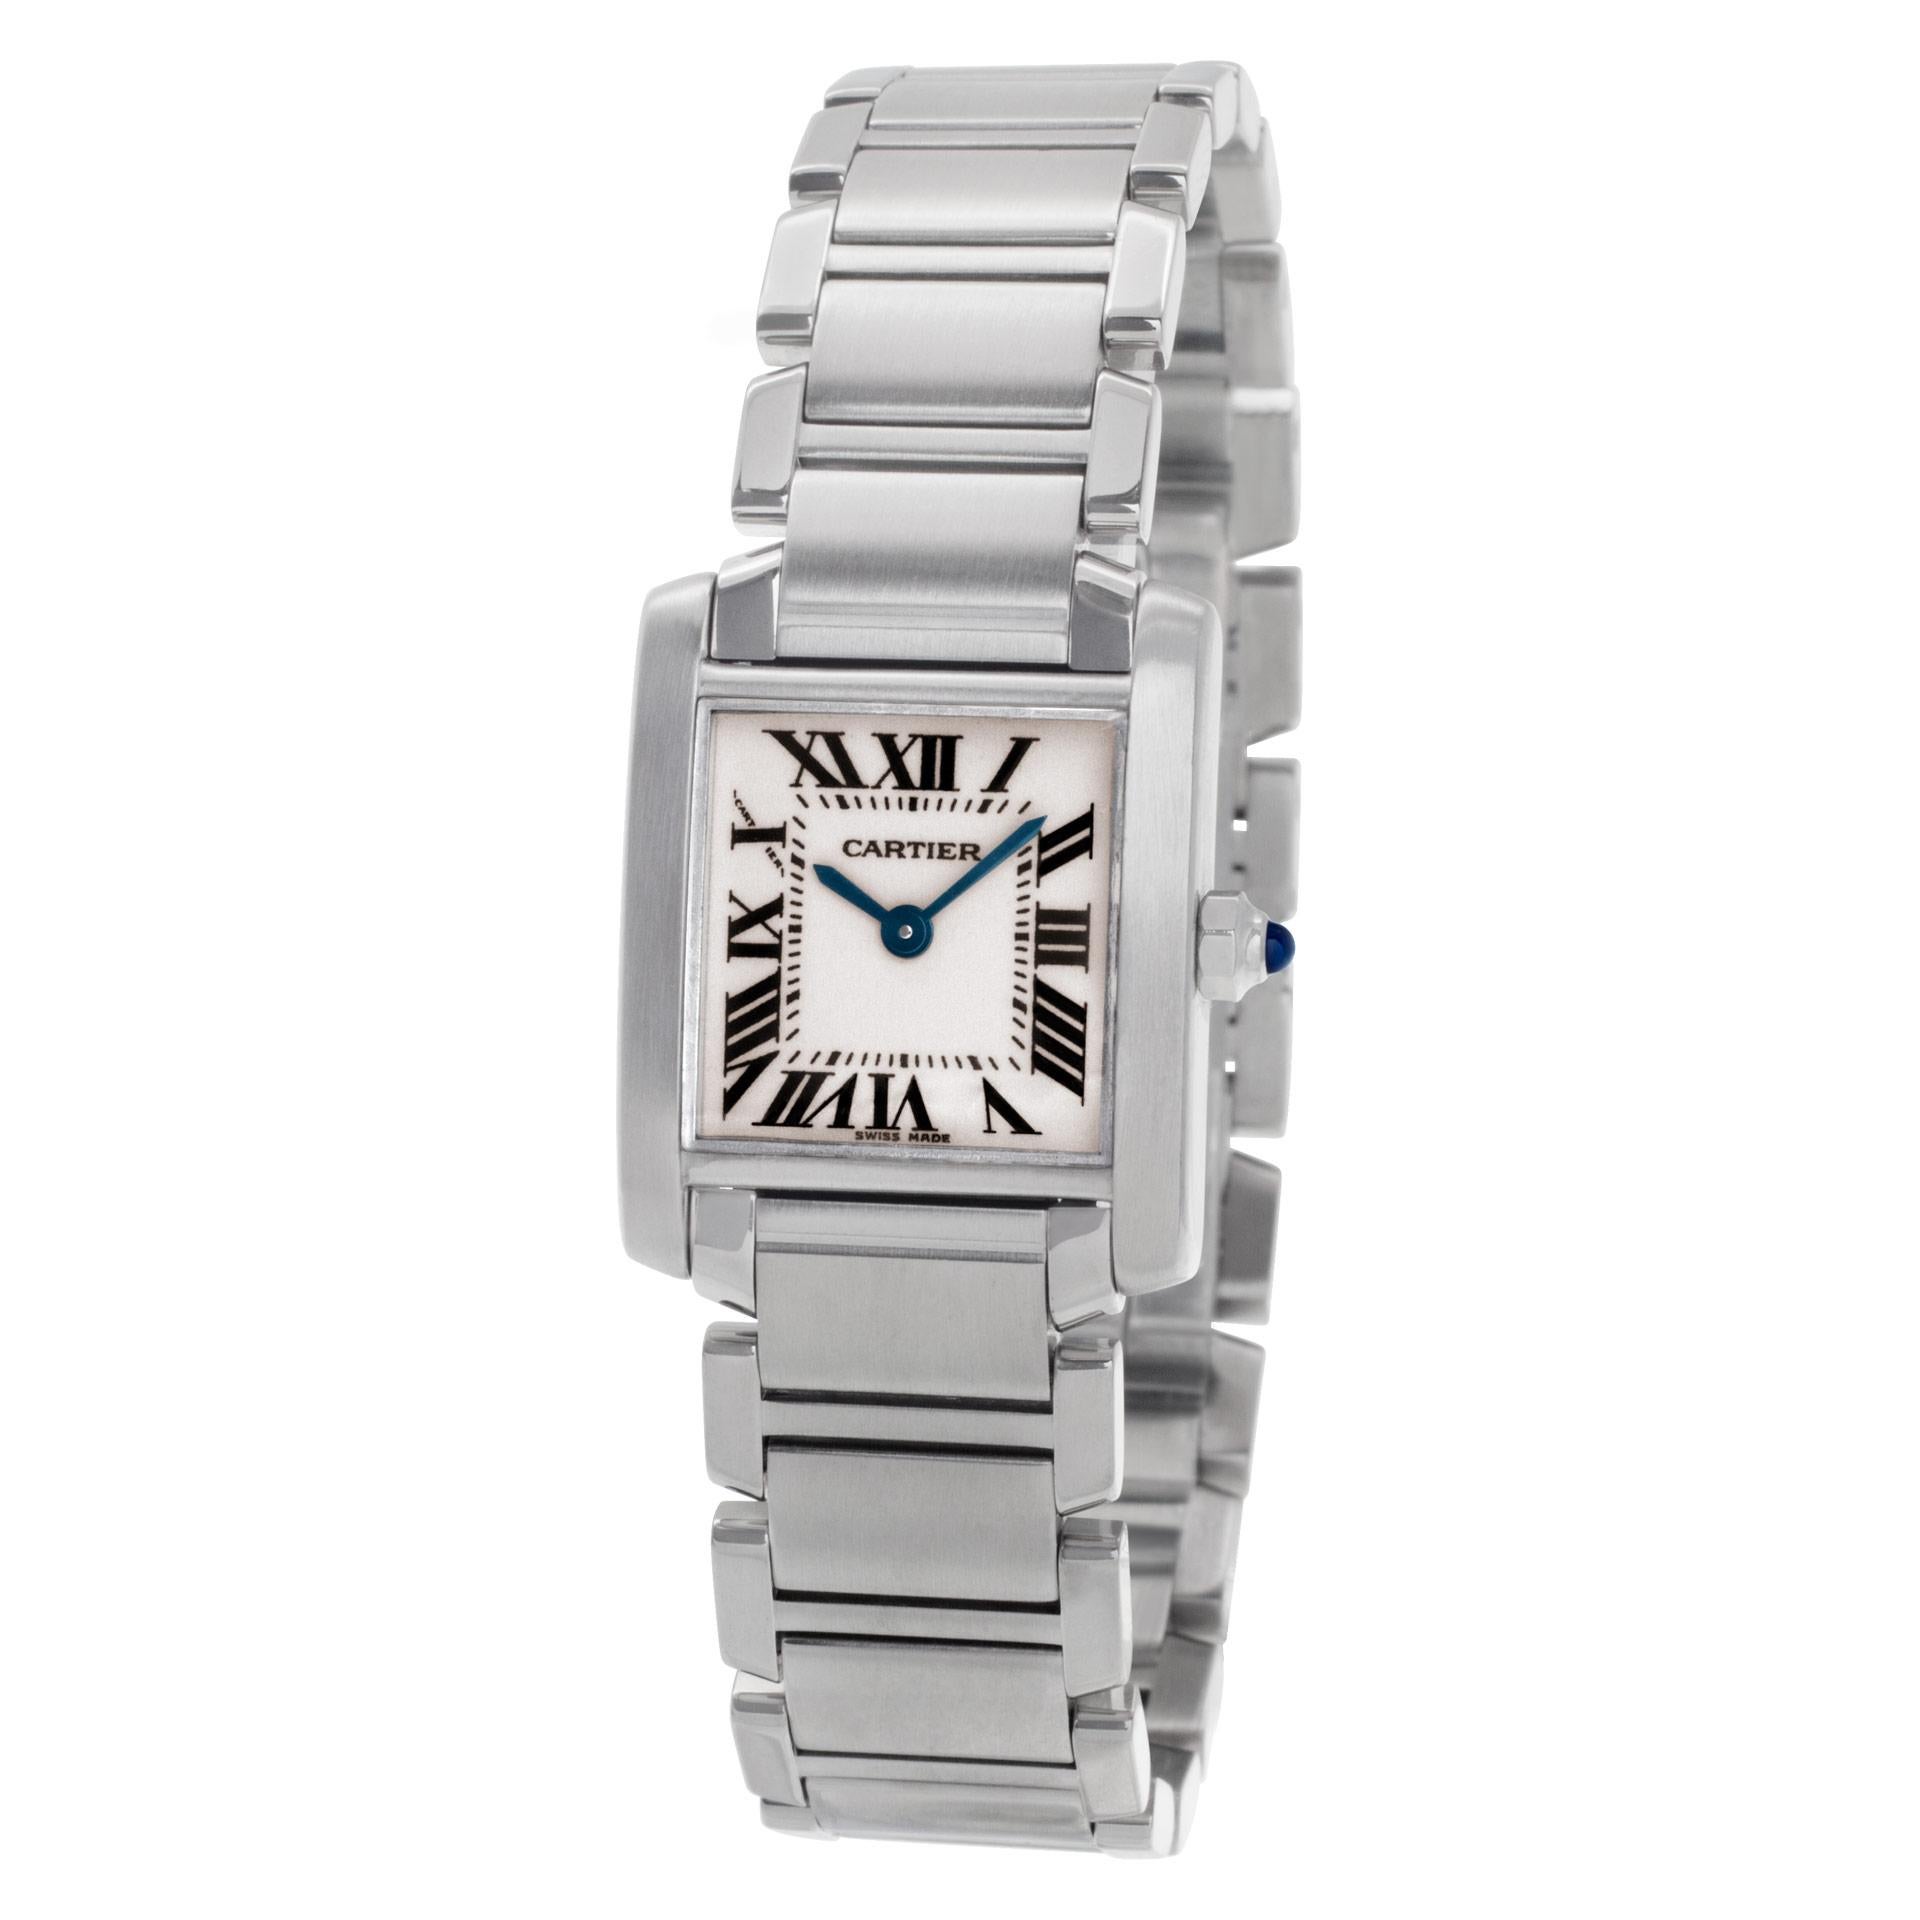 Cartier Tank Francaise in stainless steel. Quartz. Ref W51008Q3. Fine Pre-owned Cartier Watch.   Certified preowned Classic Cartier Tank Francaise w51008q3 watch is made out of Stainless steel on a Stainless Steel bracelet with a Stainless Steel